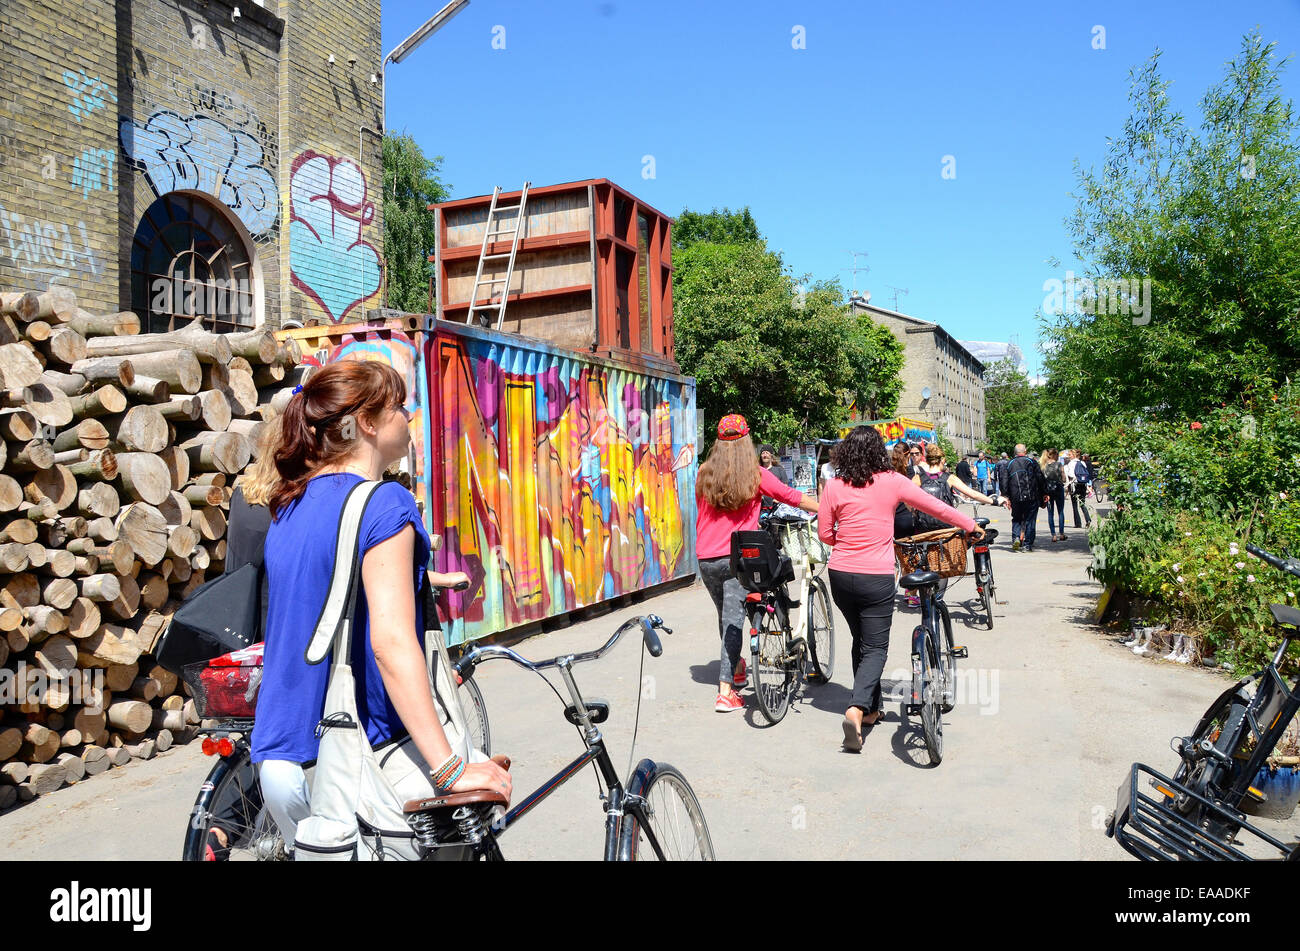 christiania free town copenhagen self proclaimed autonomous enclave of 900 people founded in 1971 in a disused danish army camp. Stock Photo